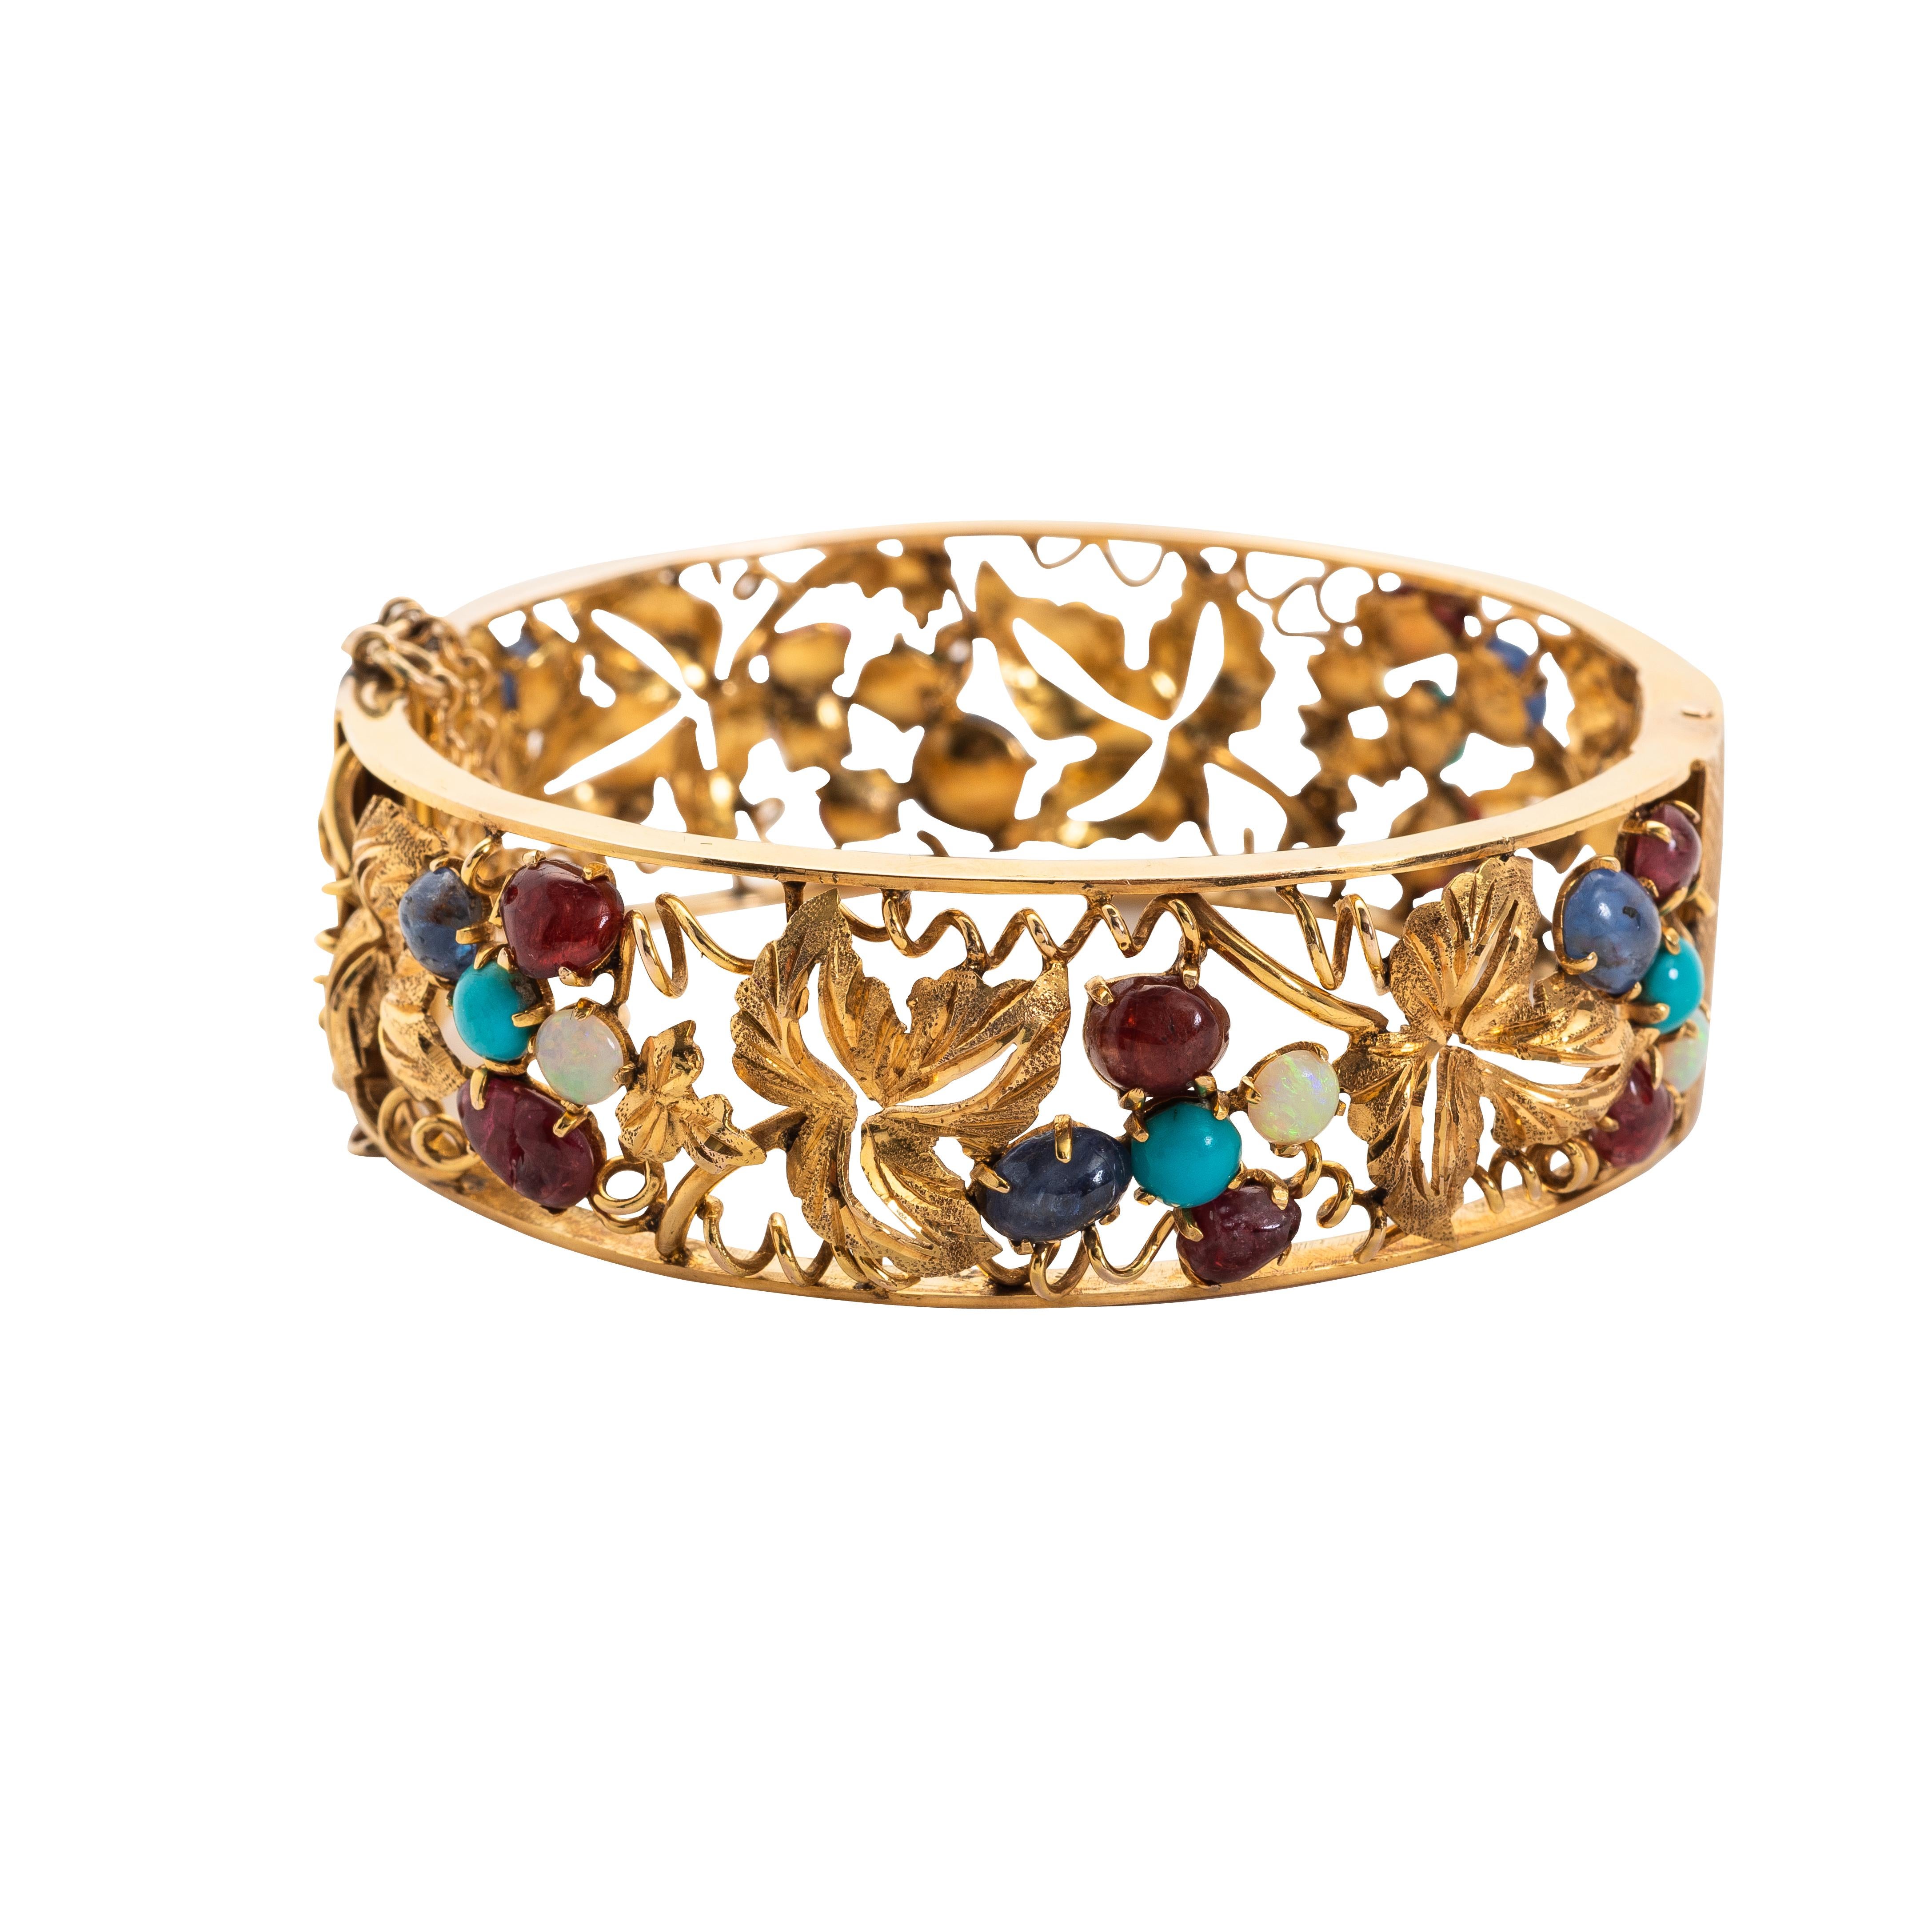 Opal, Turqoise and Gold Bangle-Bracelet
Of hinged design, set with Opals, Agate and Turquoise, gross weight approximately 23 dwts, internal circumference 2 1/4 in. (5.71 cm.)
mounted in 14kt yellow gold